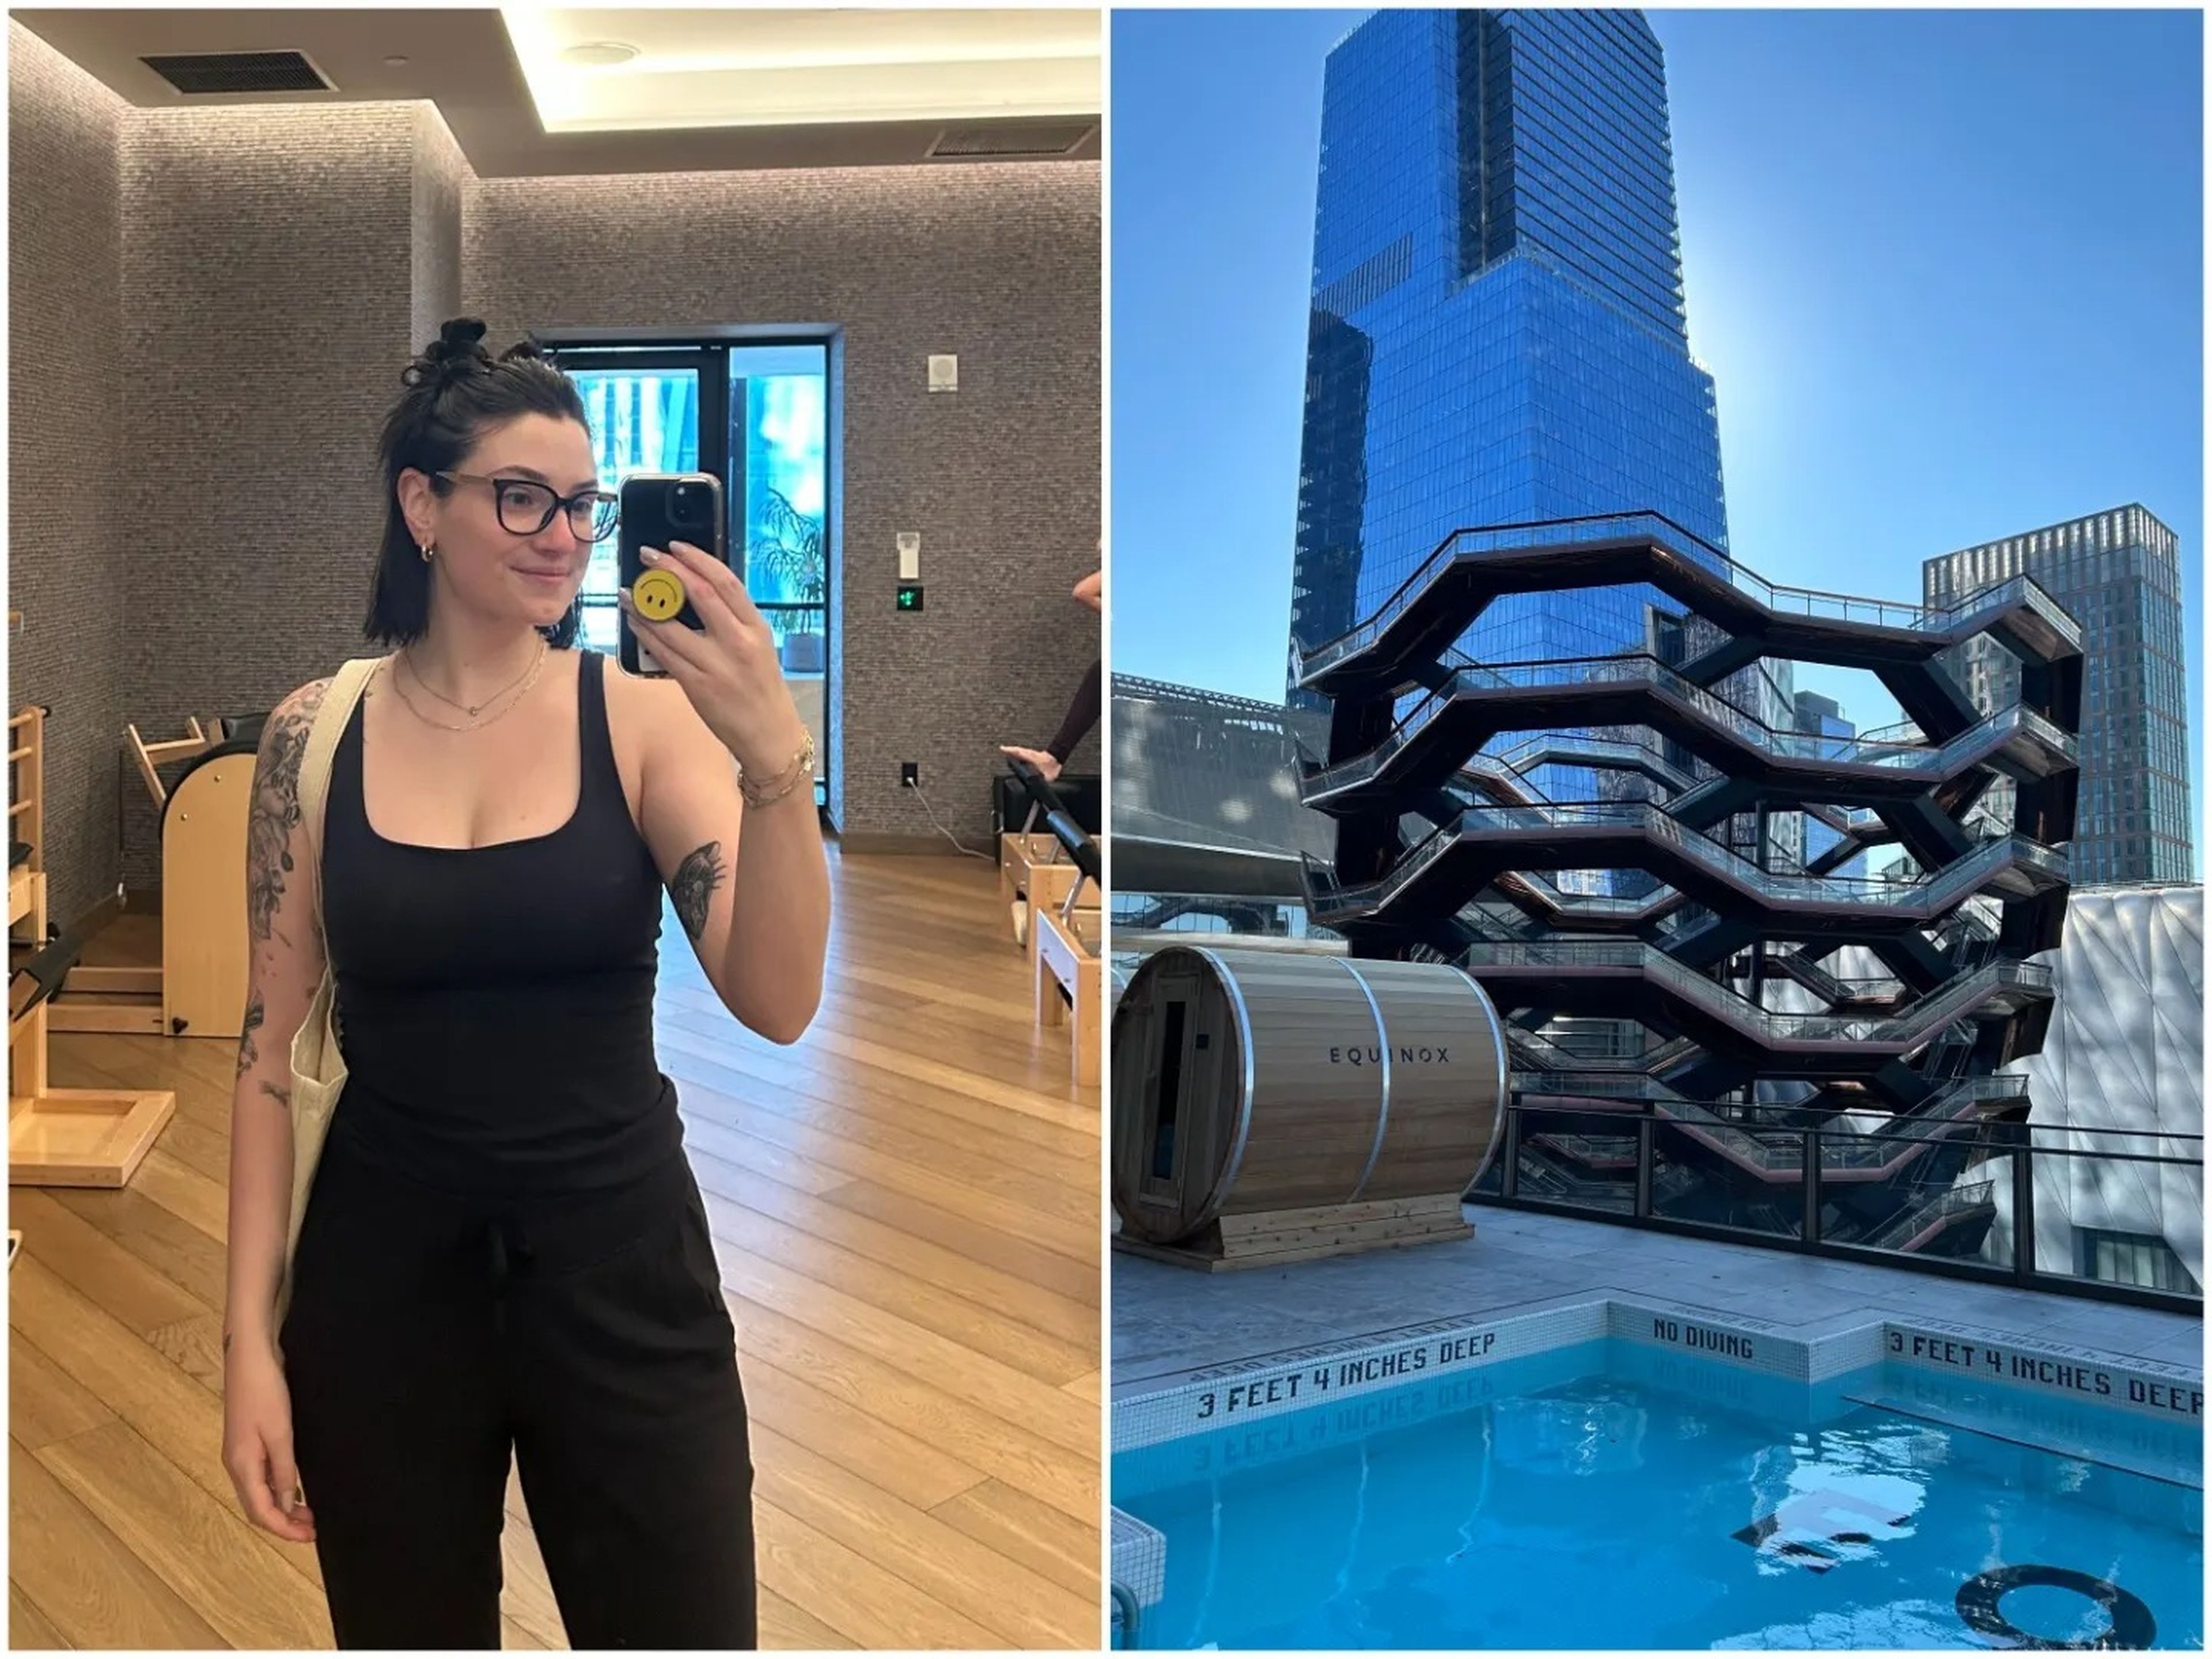 The author at a private pilates class at the Equinox Hotel (left); the hotel's outdoor pool and sauna (right).